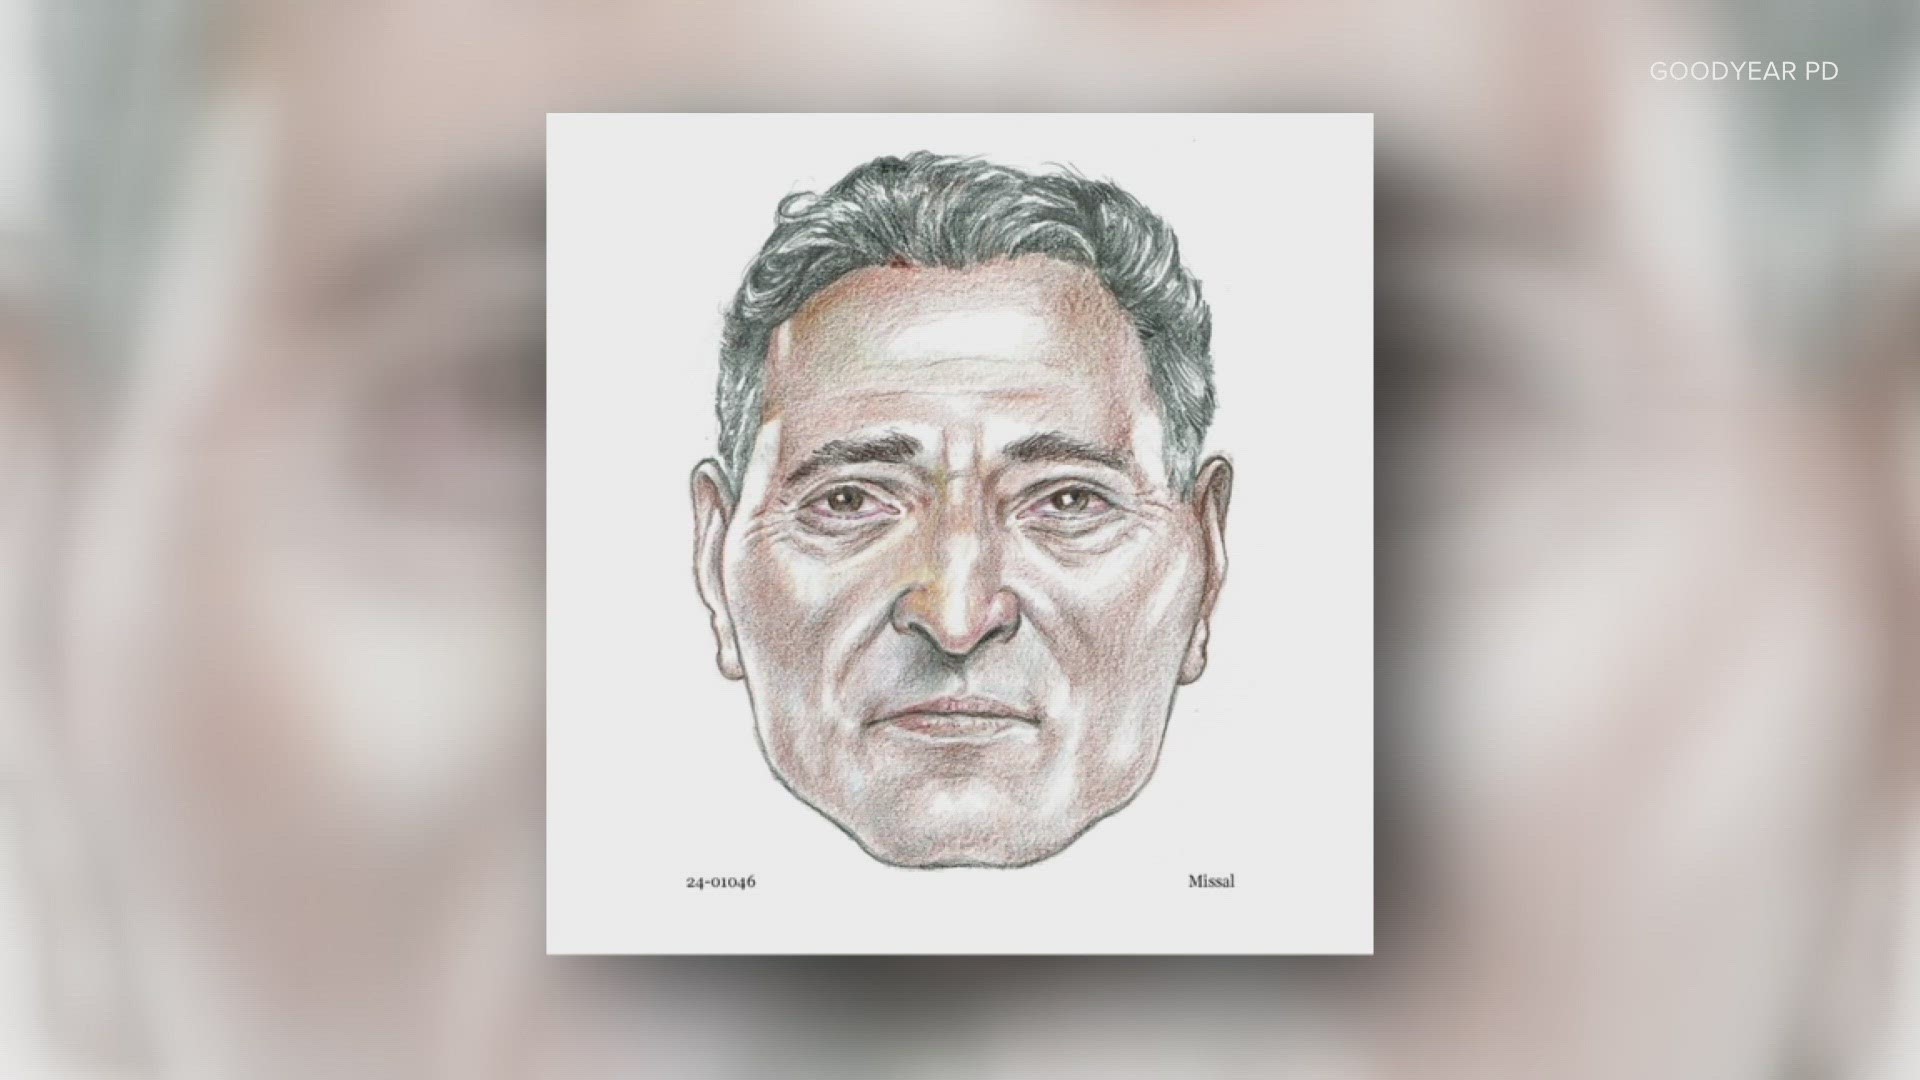 Police said the unknown man's body was found on Jan. 26 in a desert area near Maricopa County Road 85 and Estella Parkway.